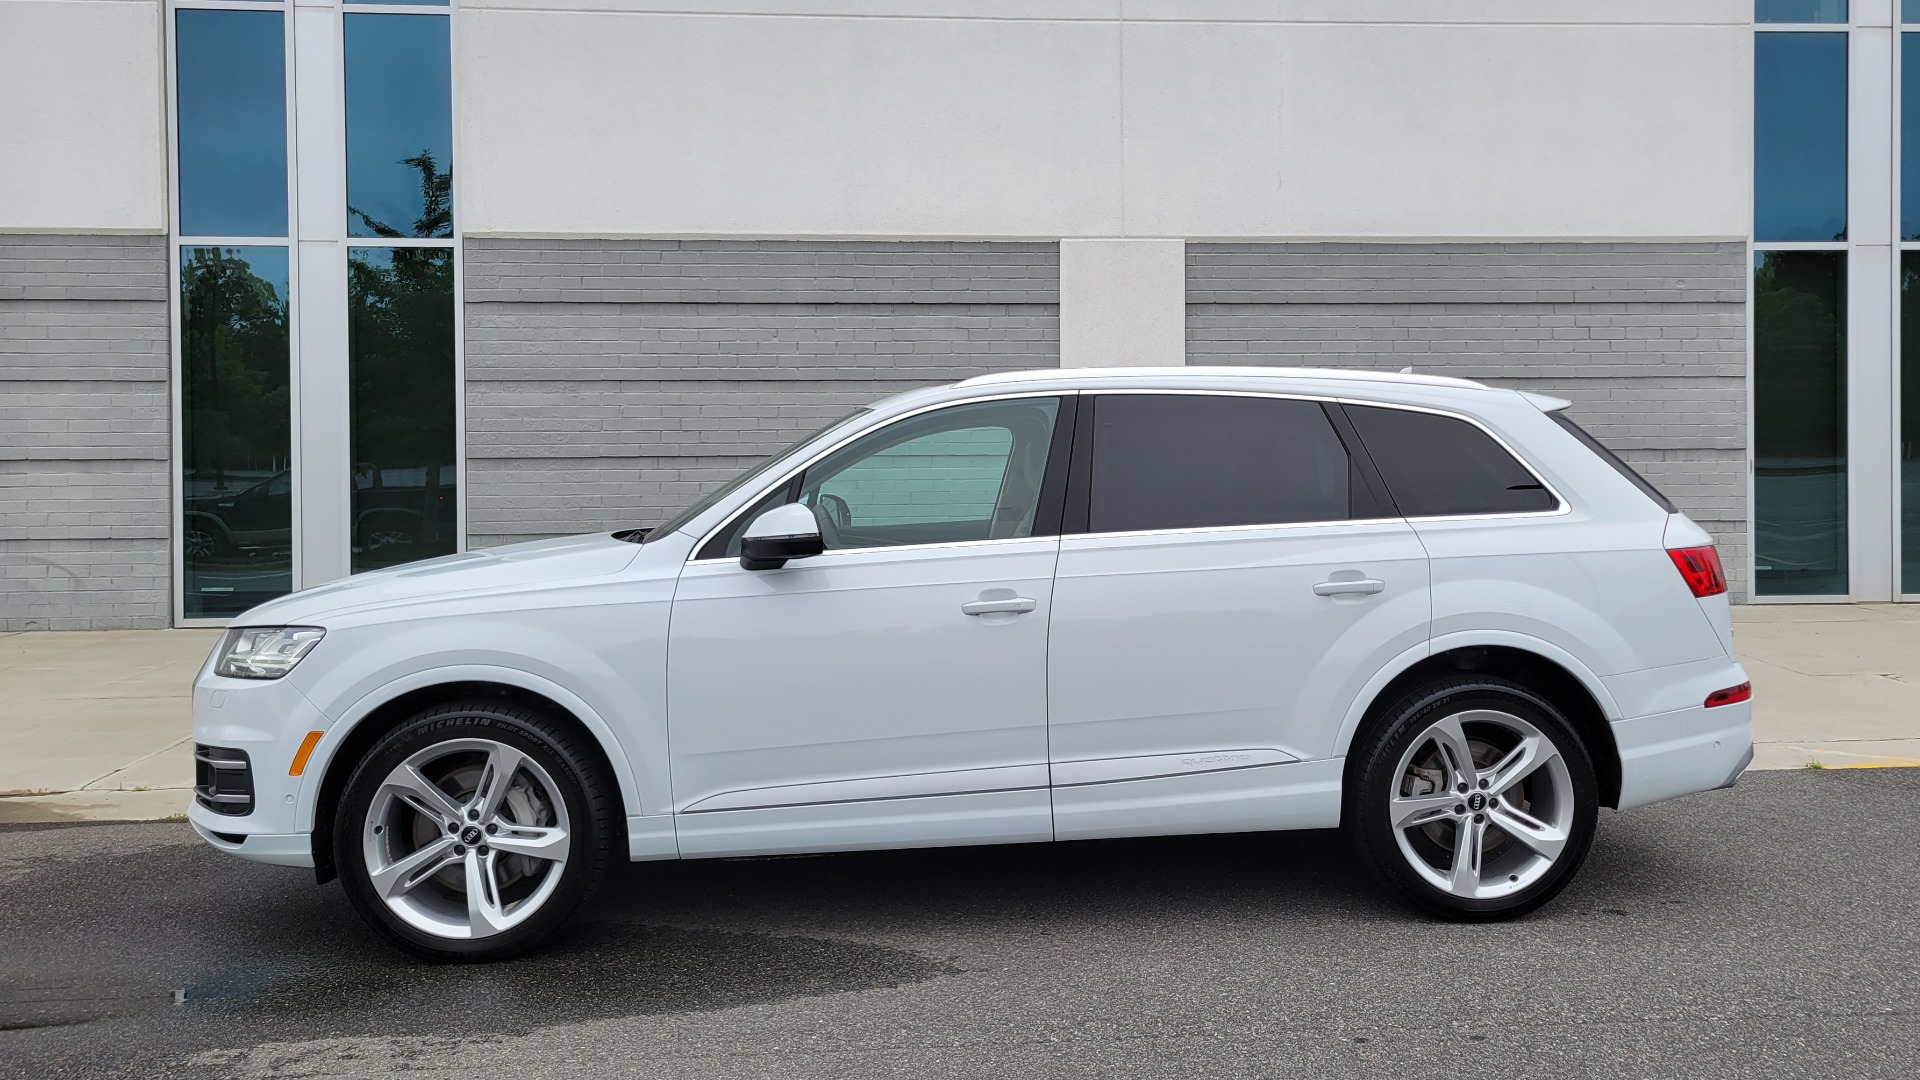 Used 2019 Audi Q7 PRESTIGE / CONV PKG / BOSE / HUD / CLD WTHR / TOWING / REARVIEW for sale $50,295 at Formula Imports in Charlotte NC 28227 4